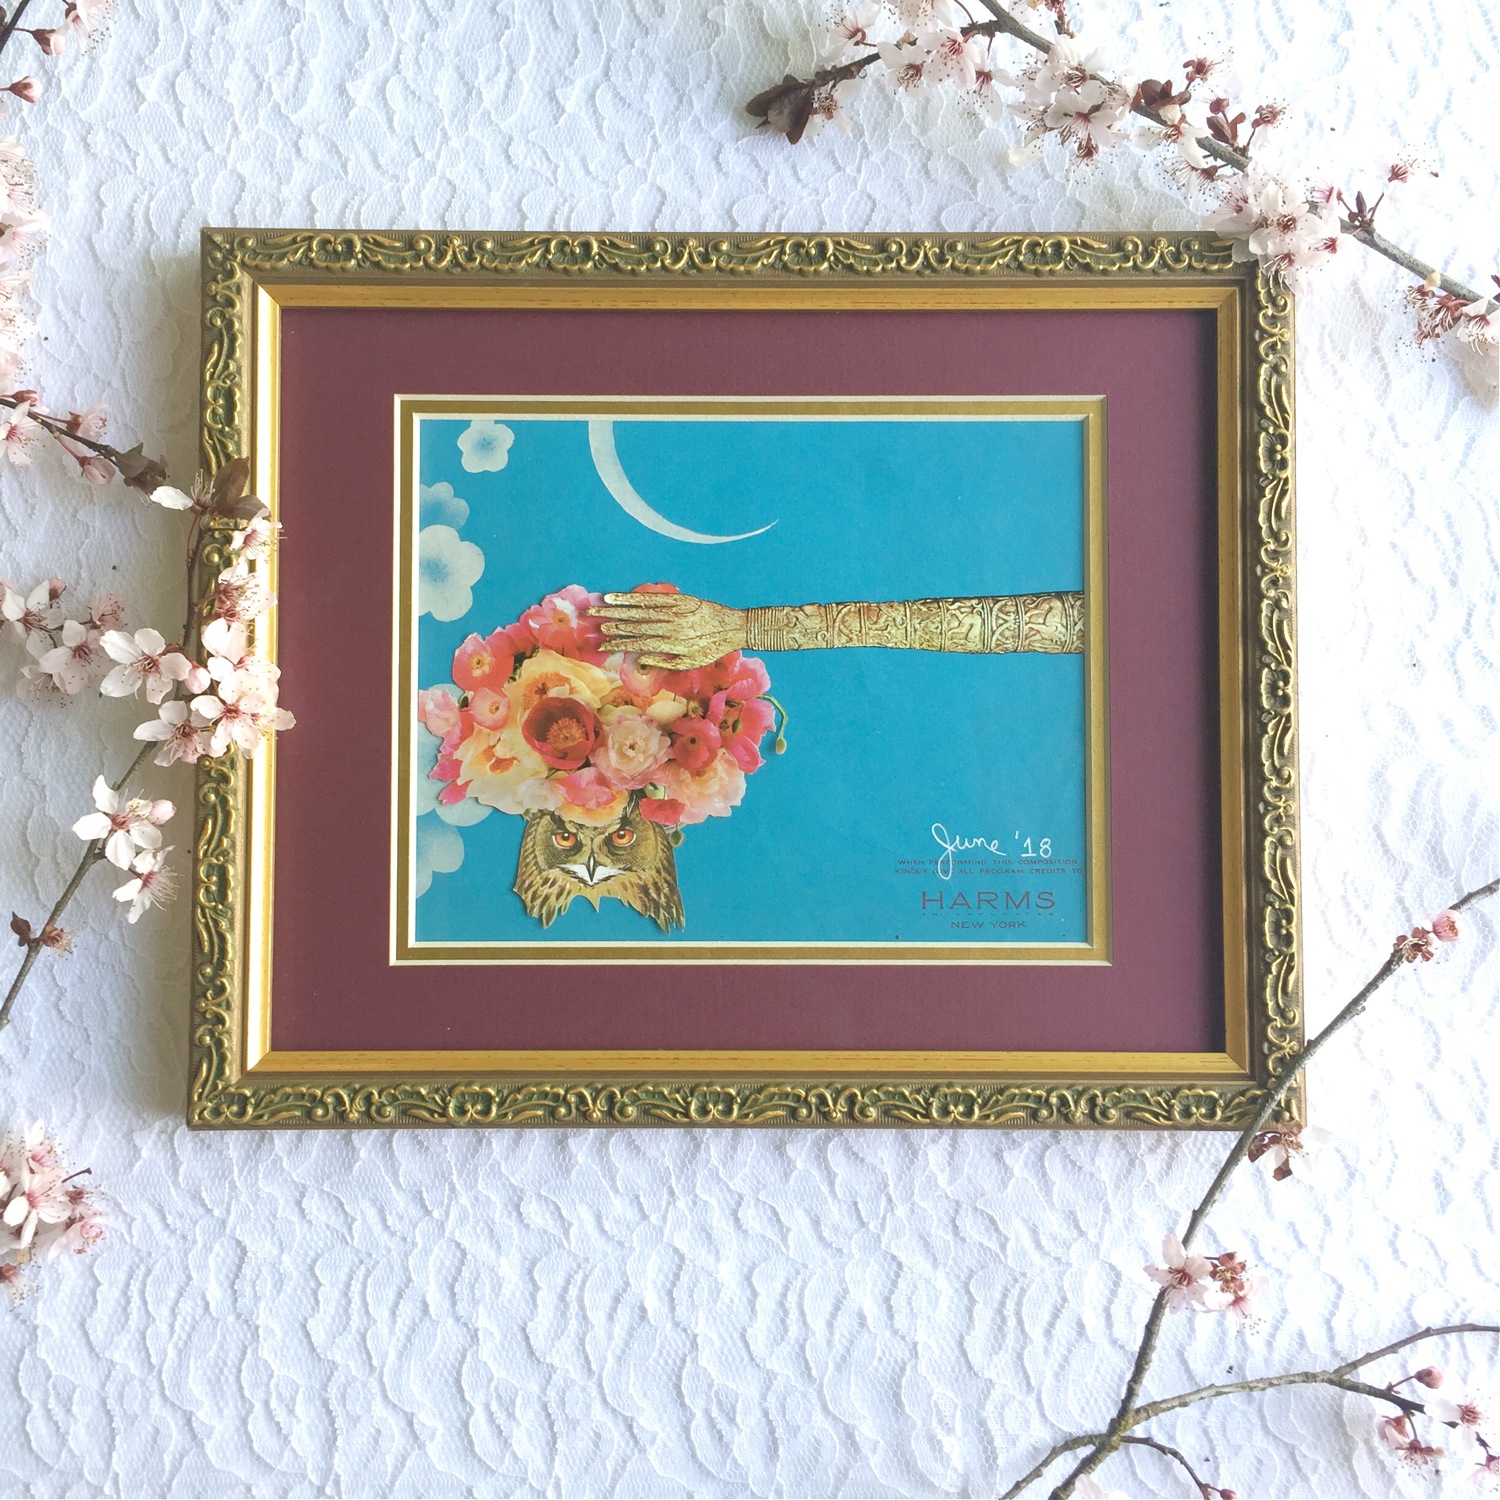 World Collage Day, World Collage Day 2019, collage making, paper collage, Mrs. Grosvenor Contemplates the Evolution of Her Next Tea Party and Owl #1 by June Anderson of Under The Plum Blossom Tree blog